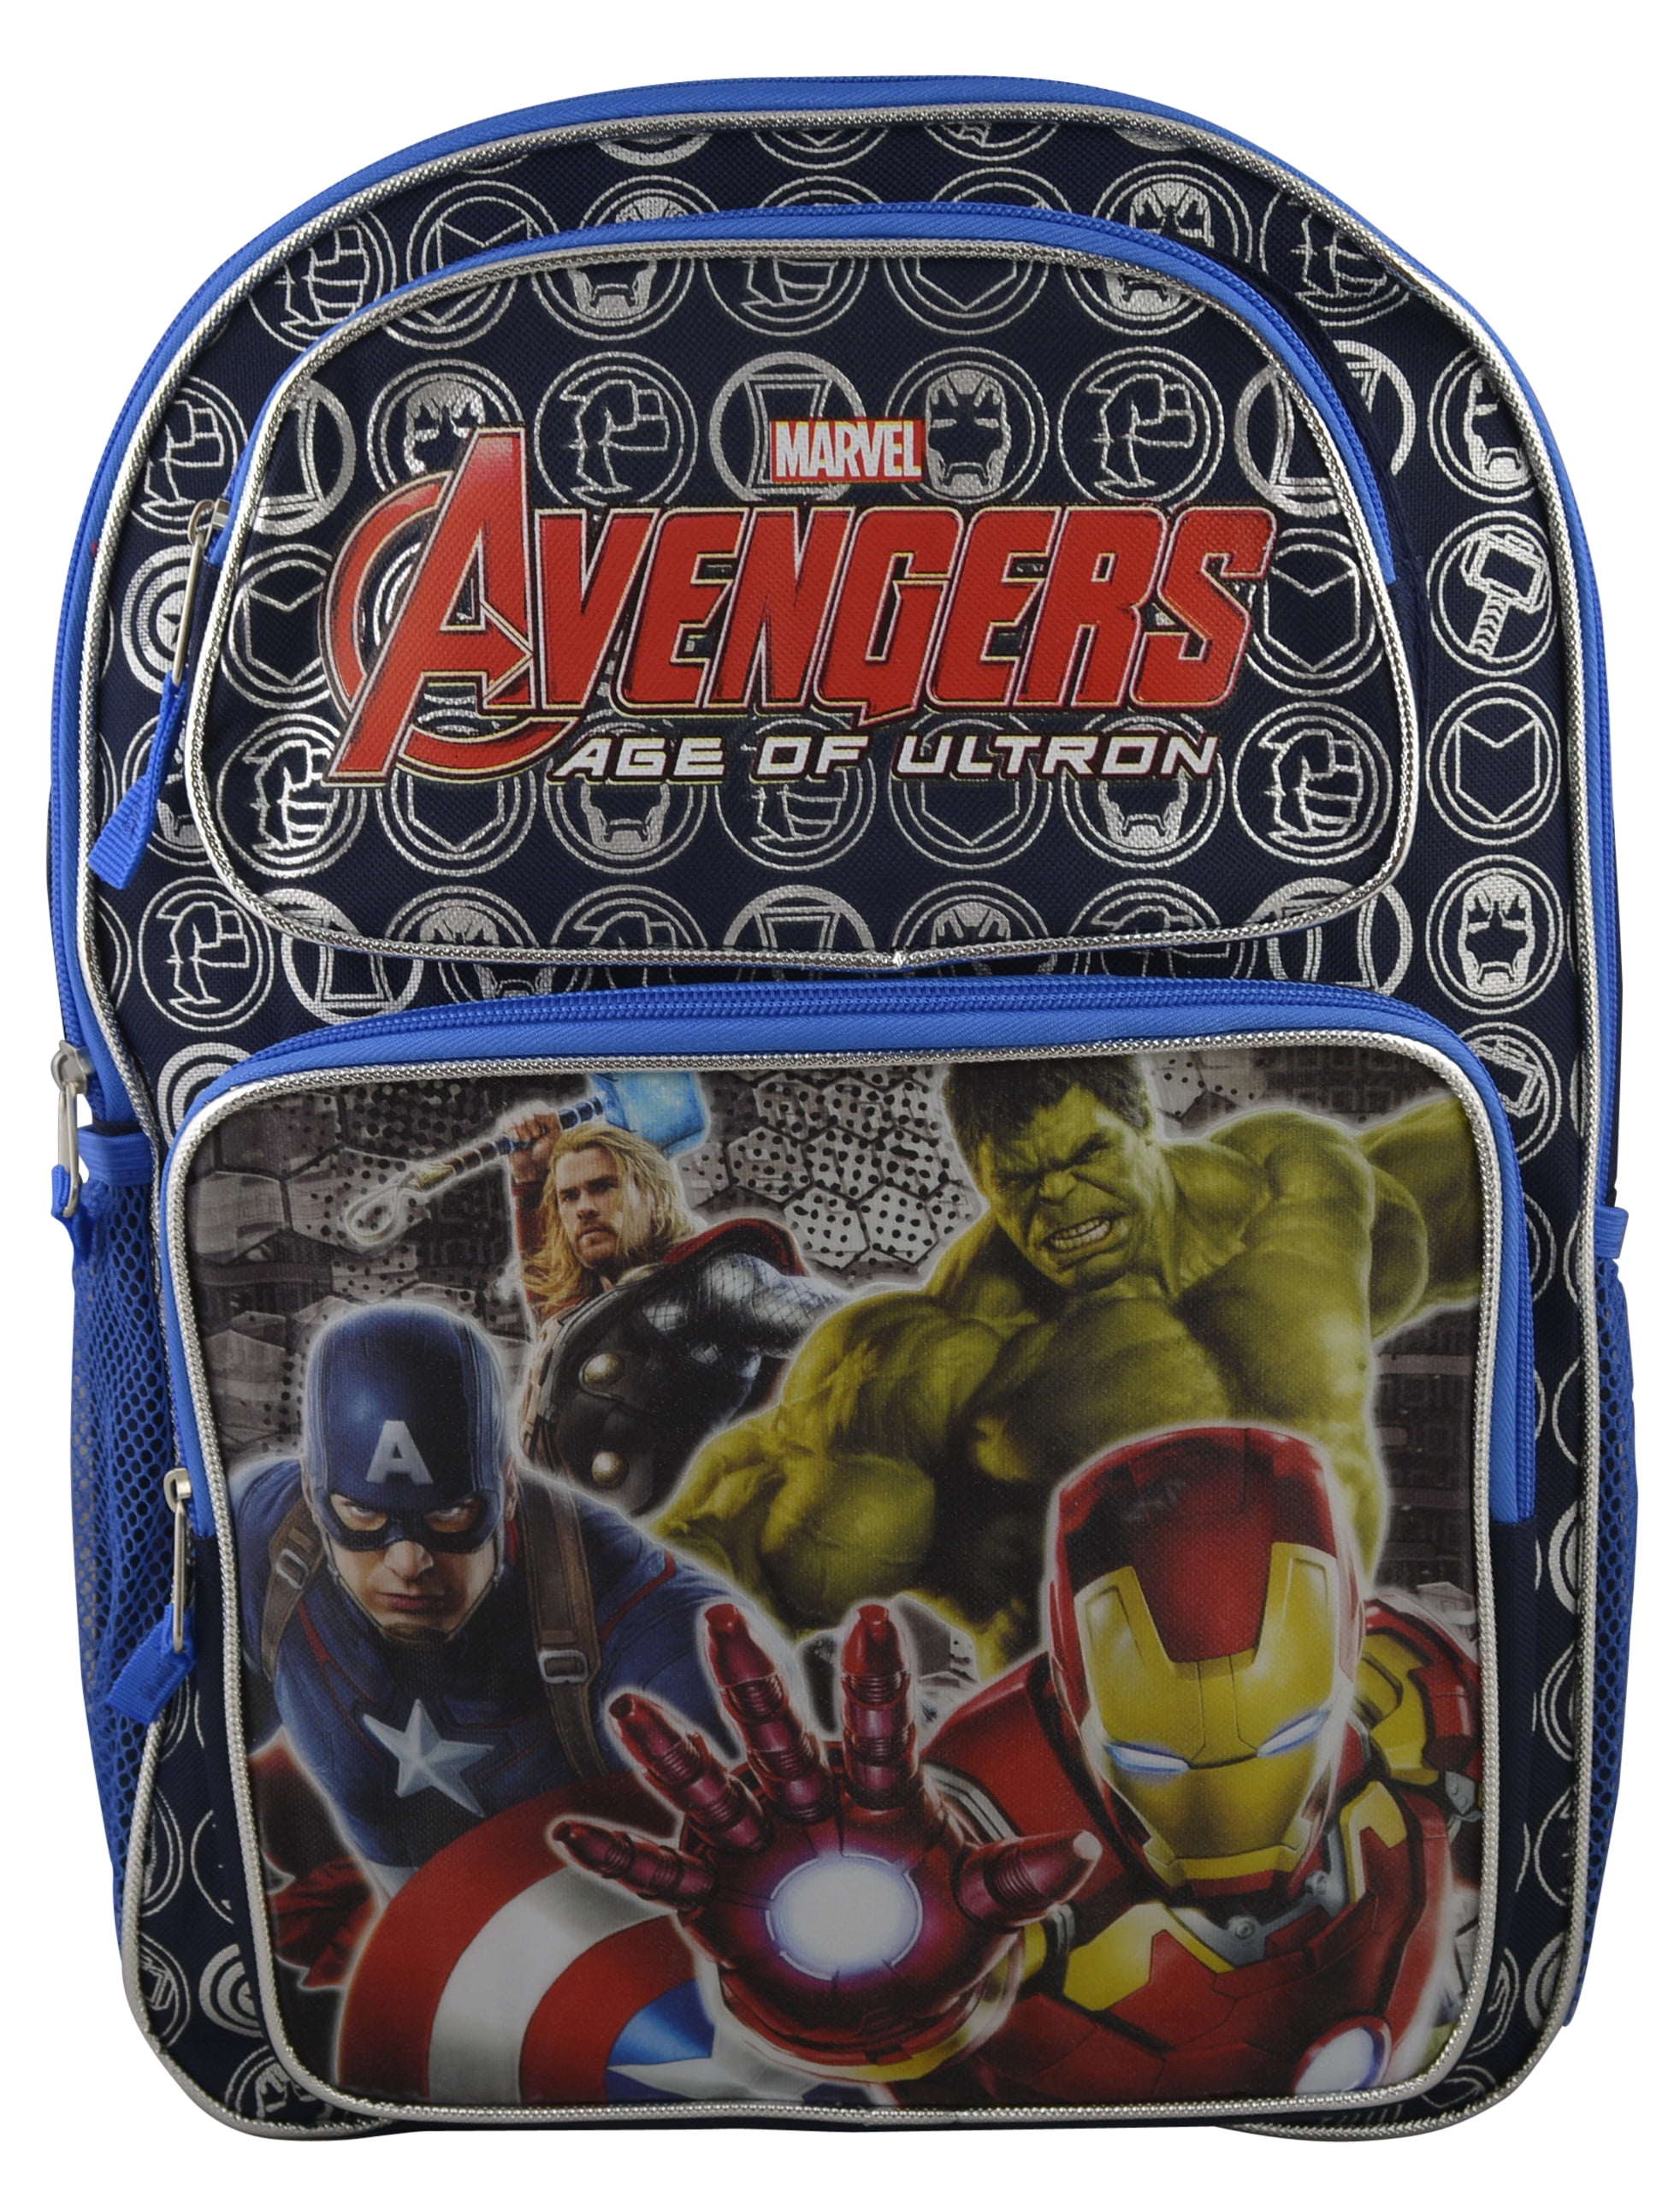 Marvel Avengers Age Of Ultron Dual Compartment Pencil Case Hulk Thor Iron Man